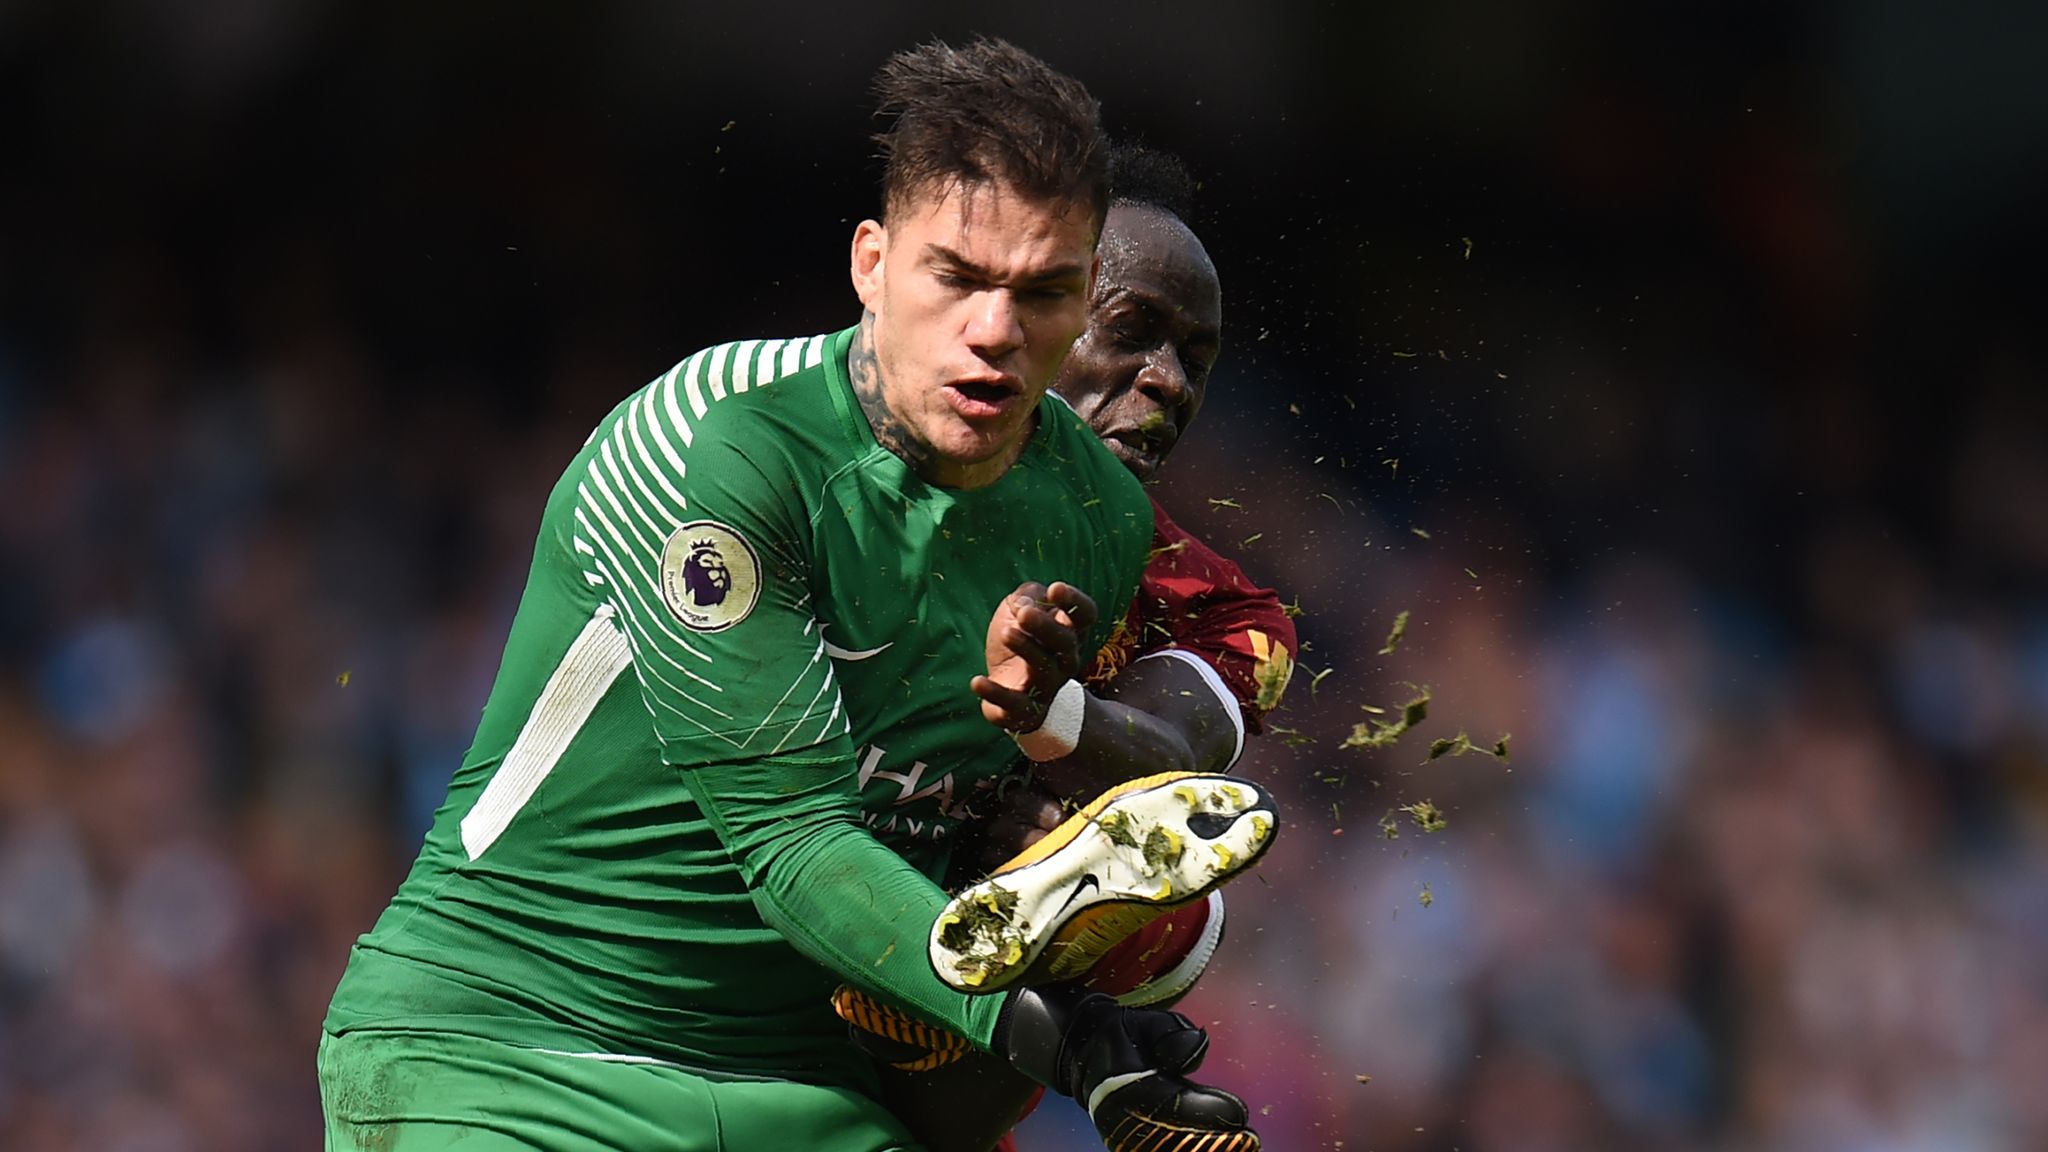 Manchester City goalkeeper Ederson accepts apology from Liverpool&#39;s Sadio Mane | Football News | Sky Sports